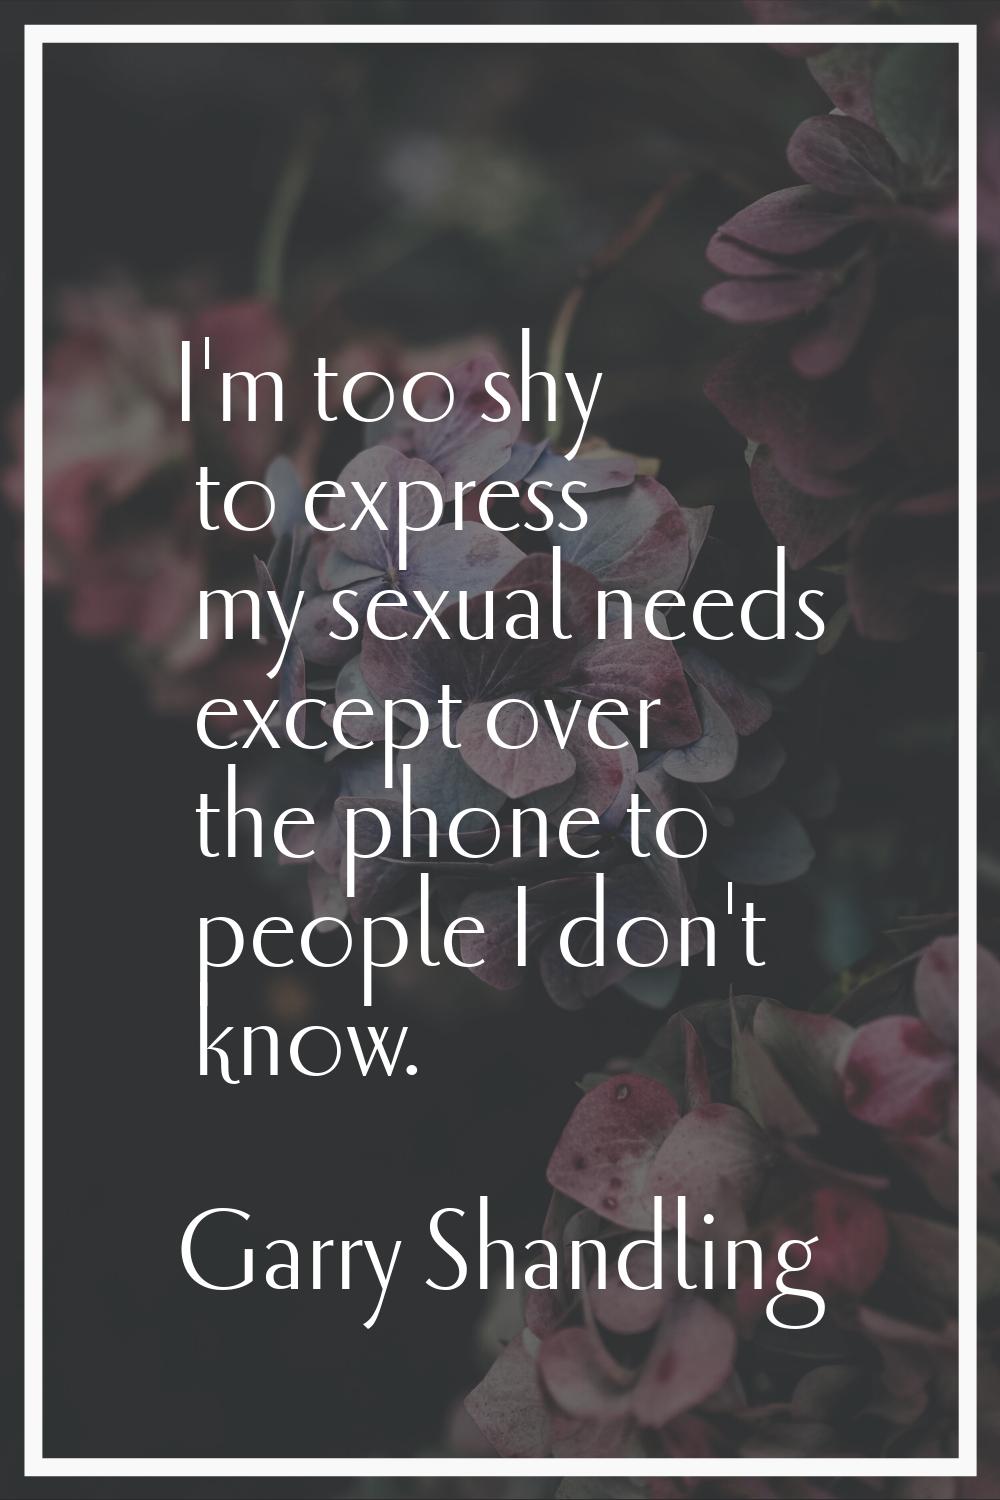 I'm too shy to express my sexual needs except over the phone to people I don't know.